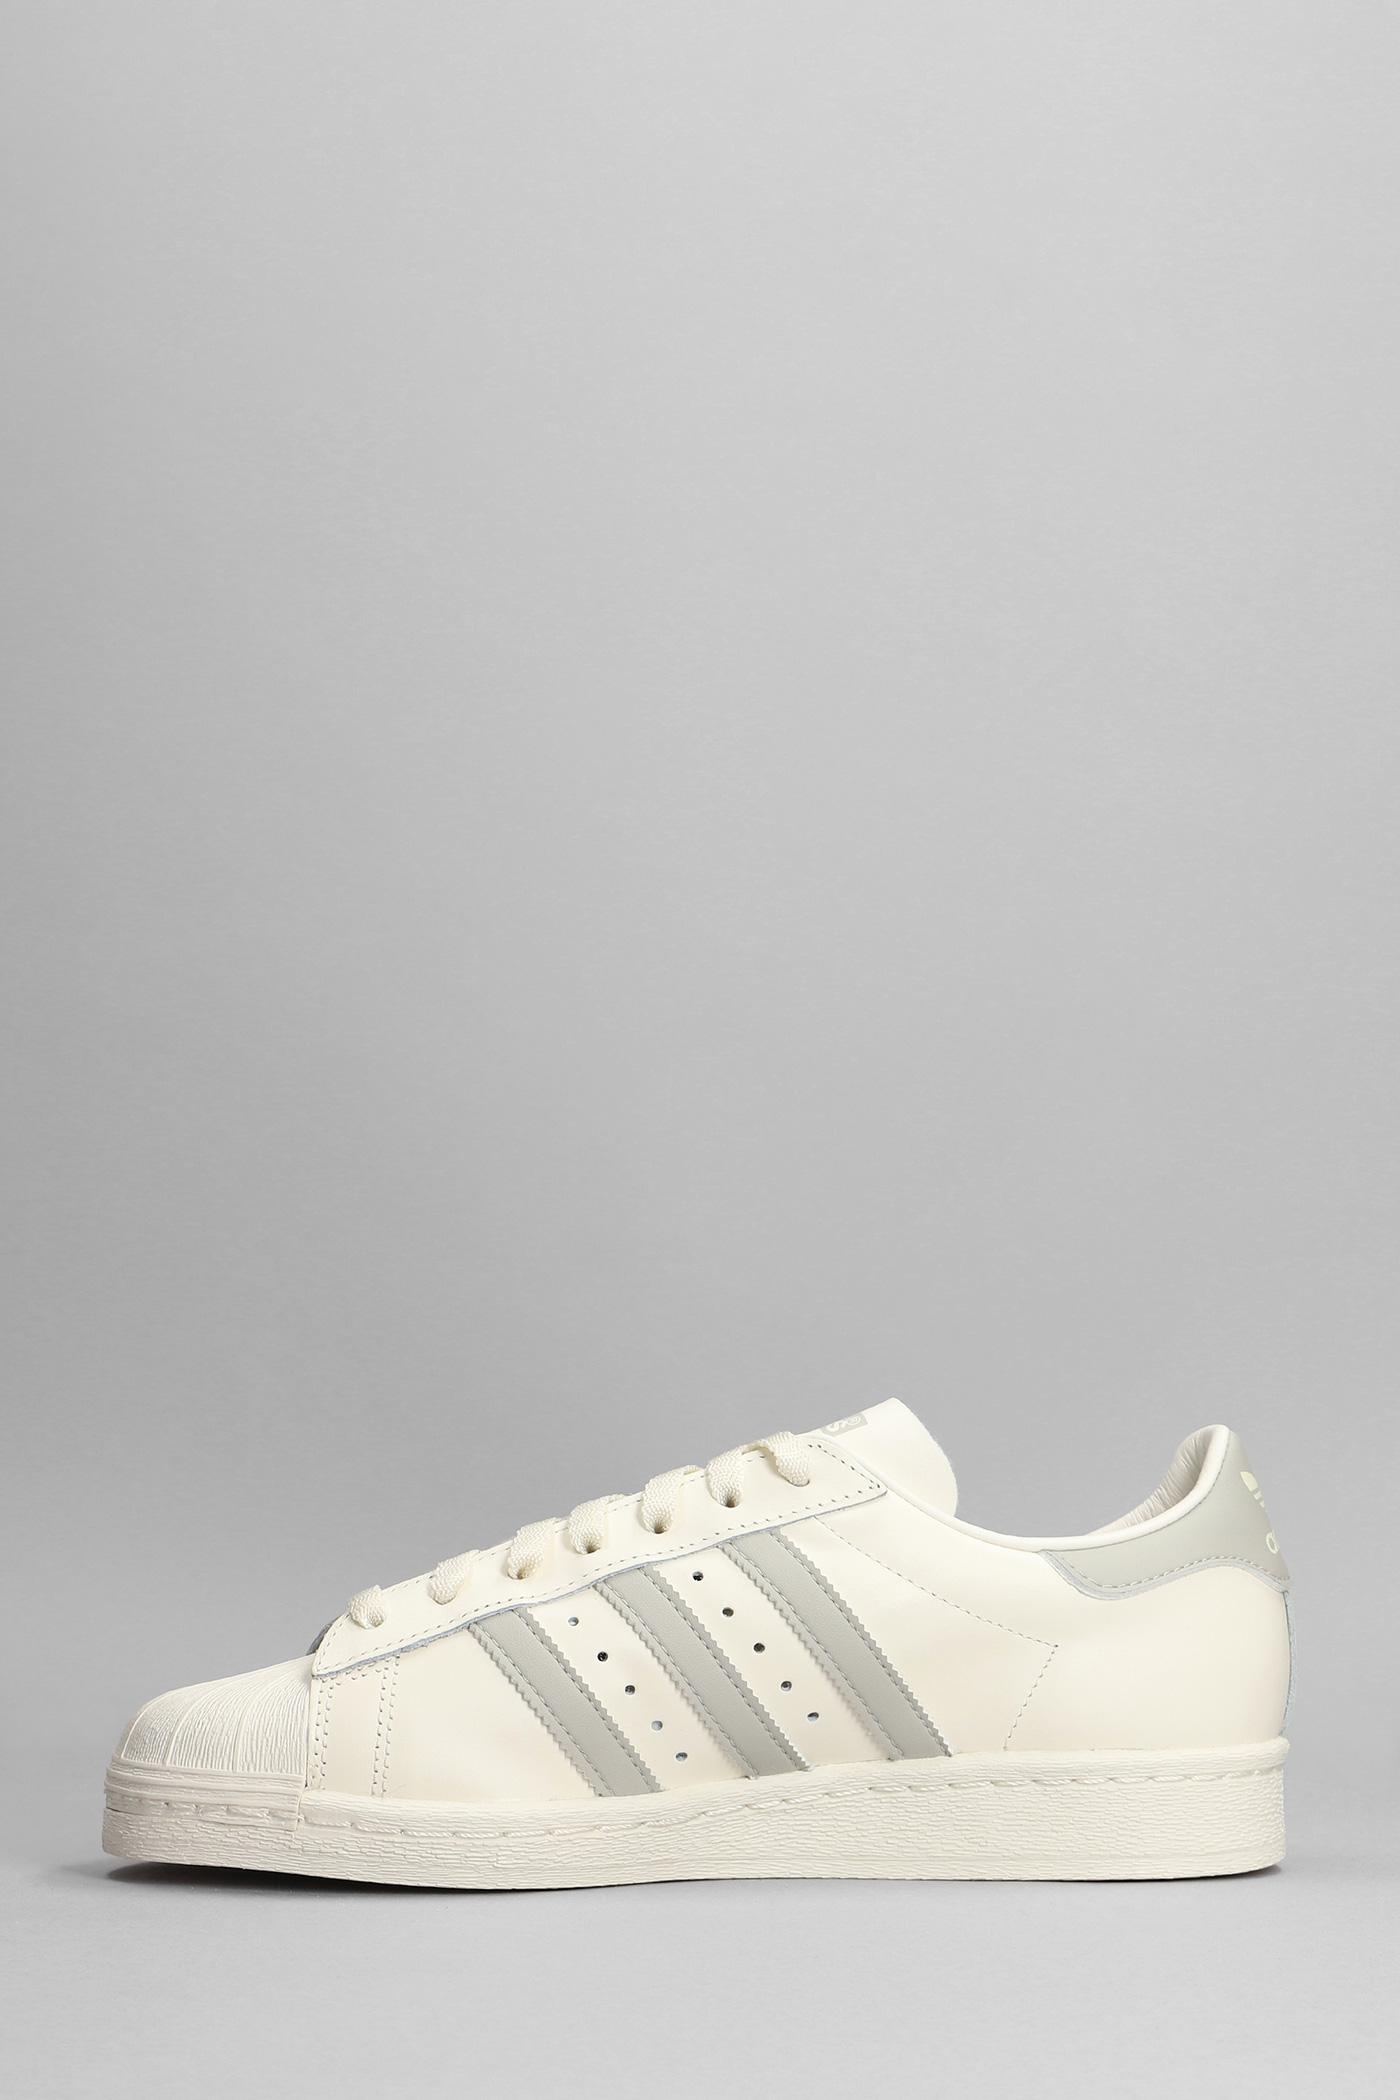 adidas Superstar 82 Sneakers In White Leather for Men | Lyst